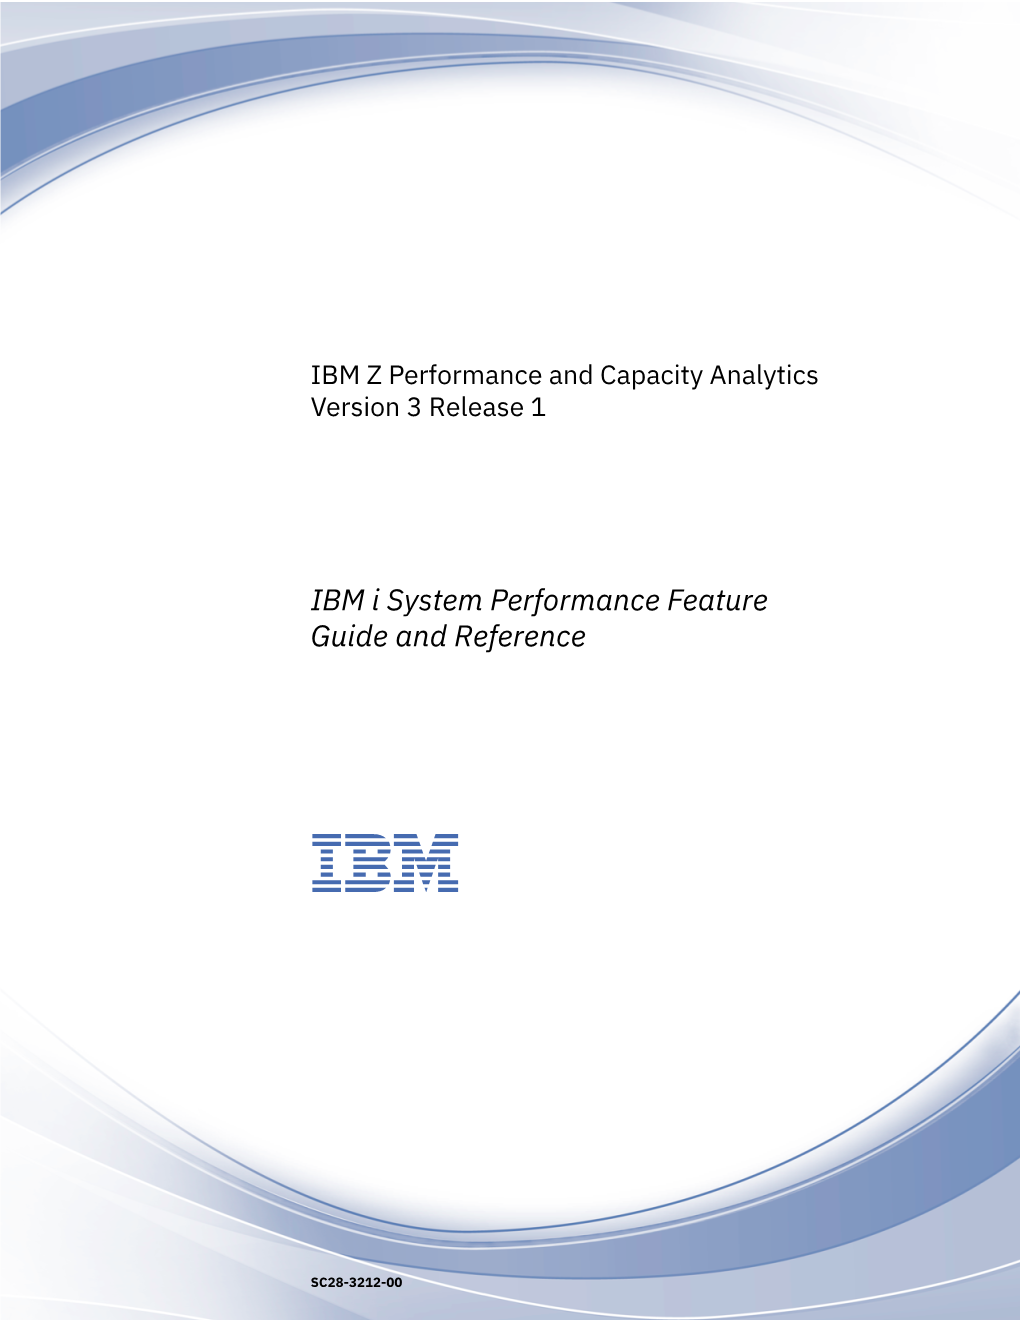 IBM Z Performance and Capacity Analytics: IBM I System Performance Feature Guide and Reference Introducing the SP400 Feature